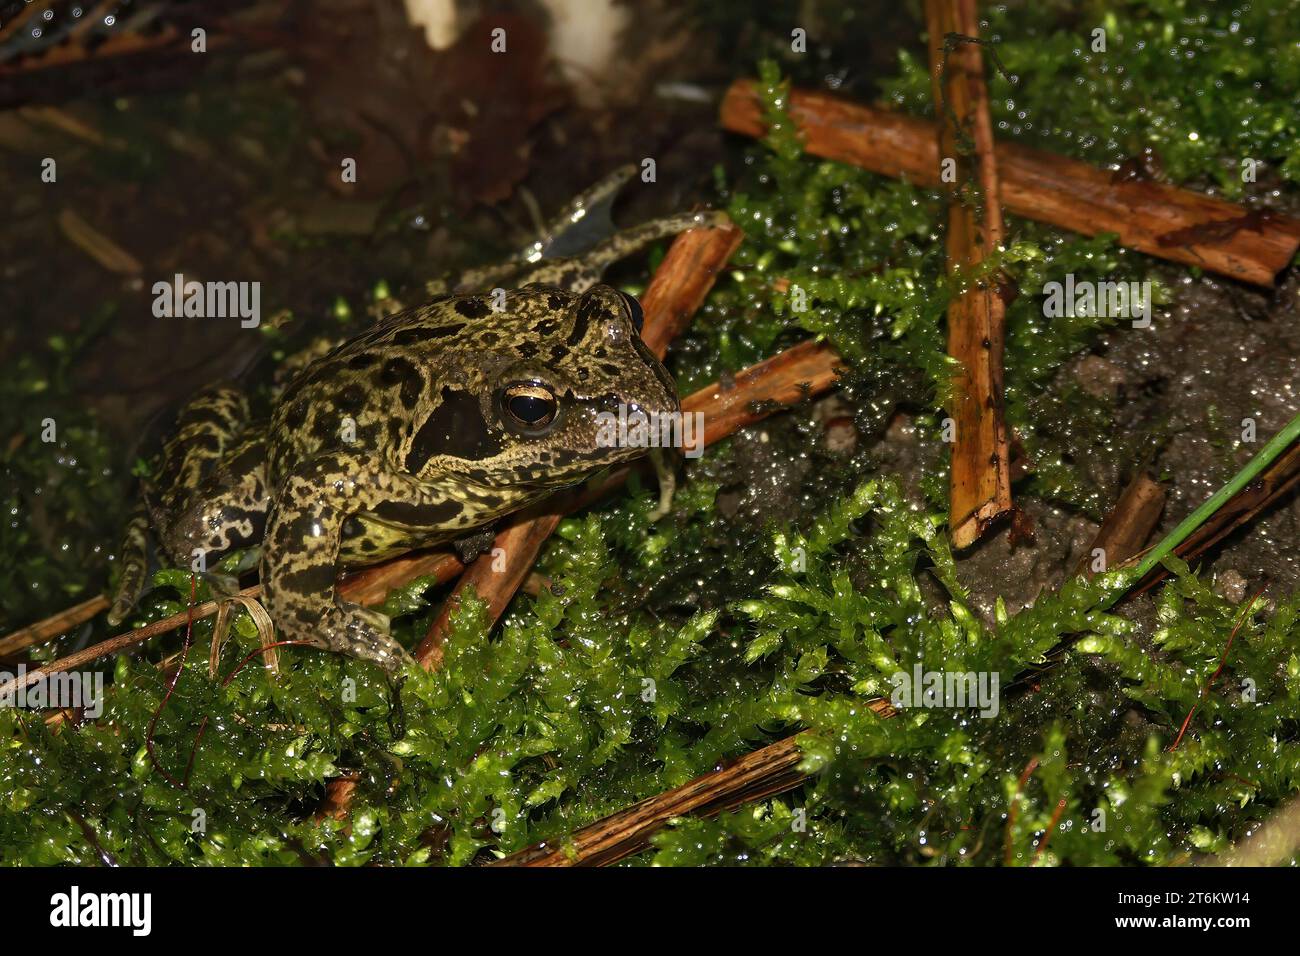 Natural closeup on the endangered and rare Iberian stream, frog Rana iberica, sitting on moss Stock Photo